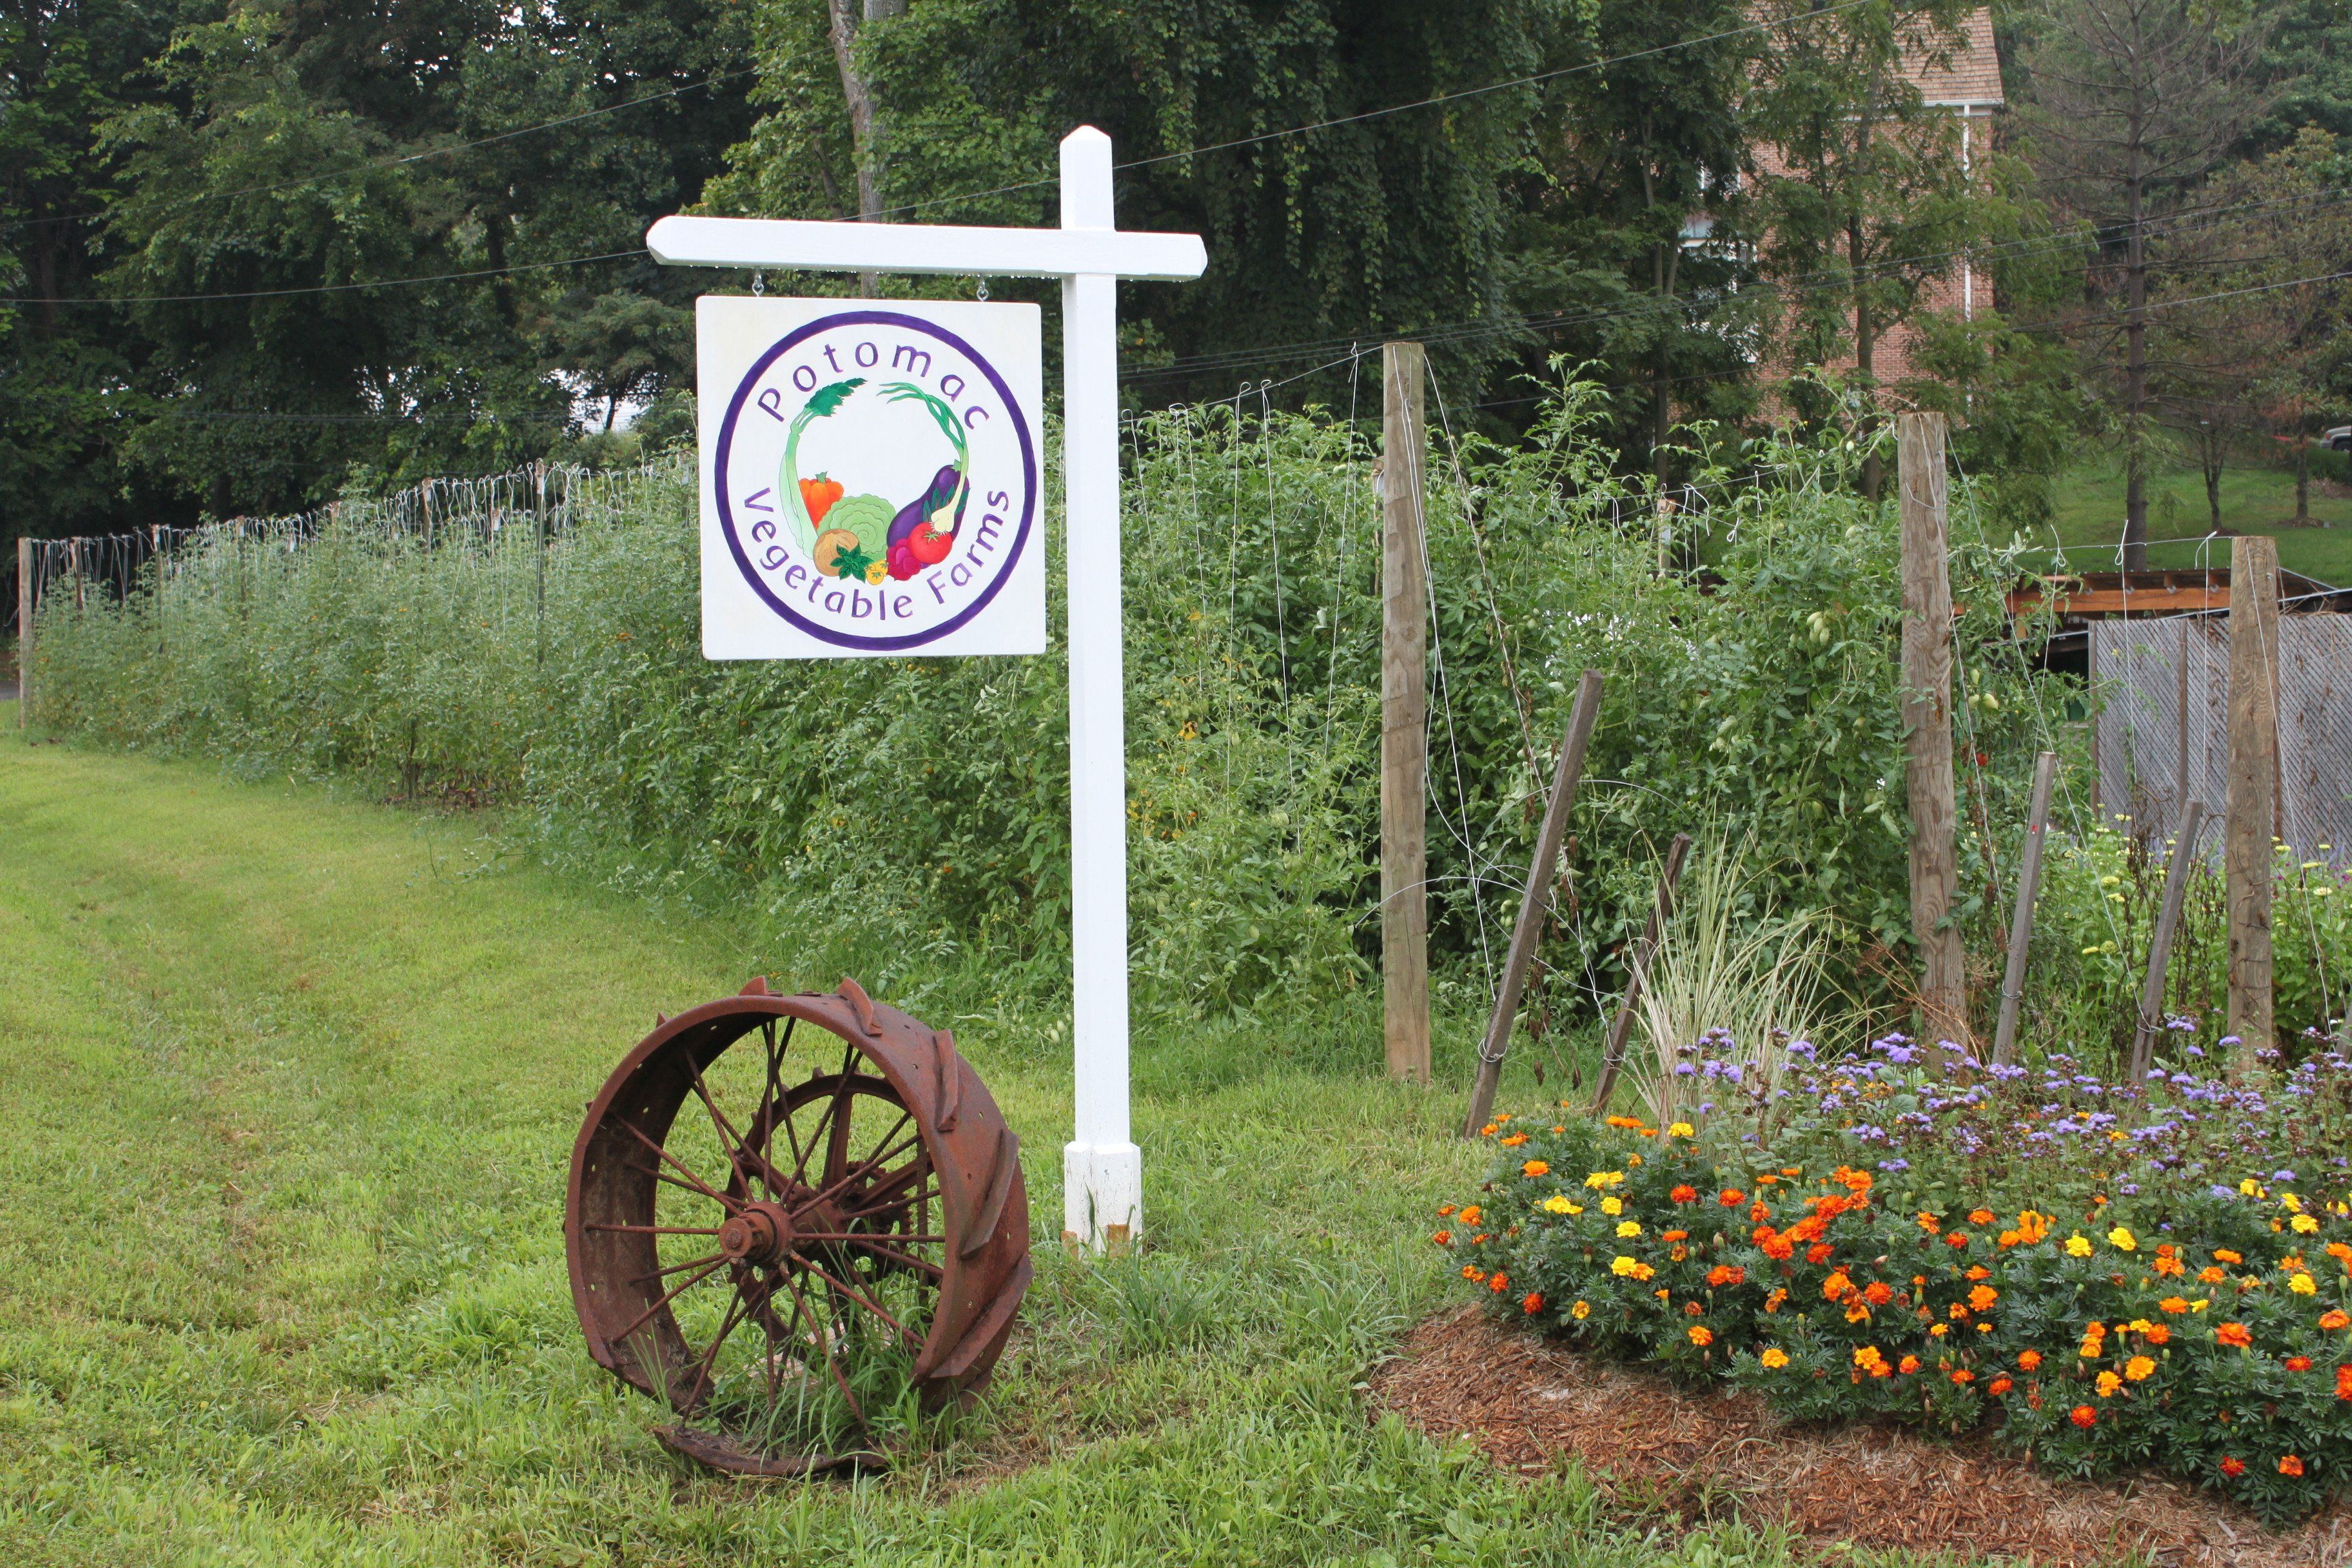 Previous Happening: Welcome to Potomac Vegetable Farms!